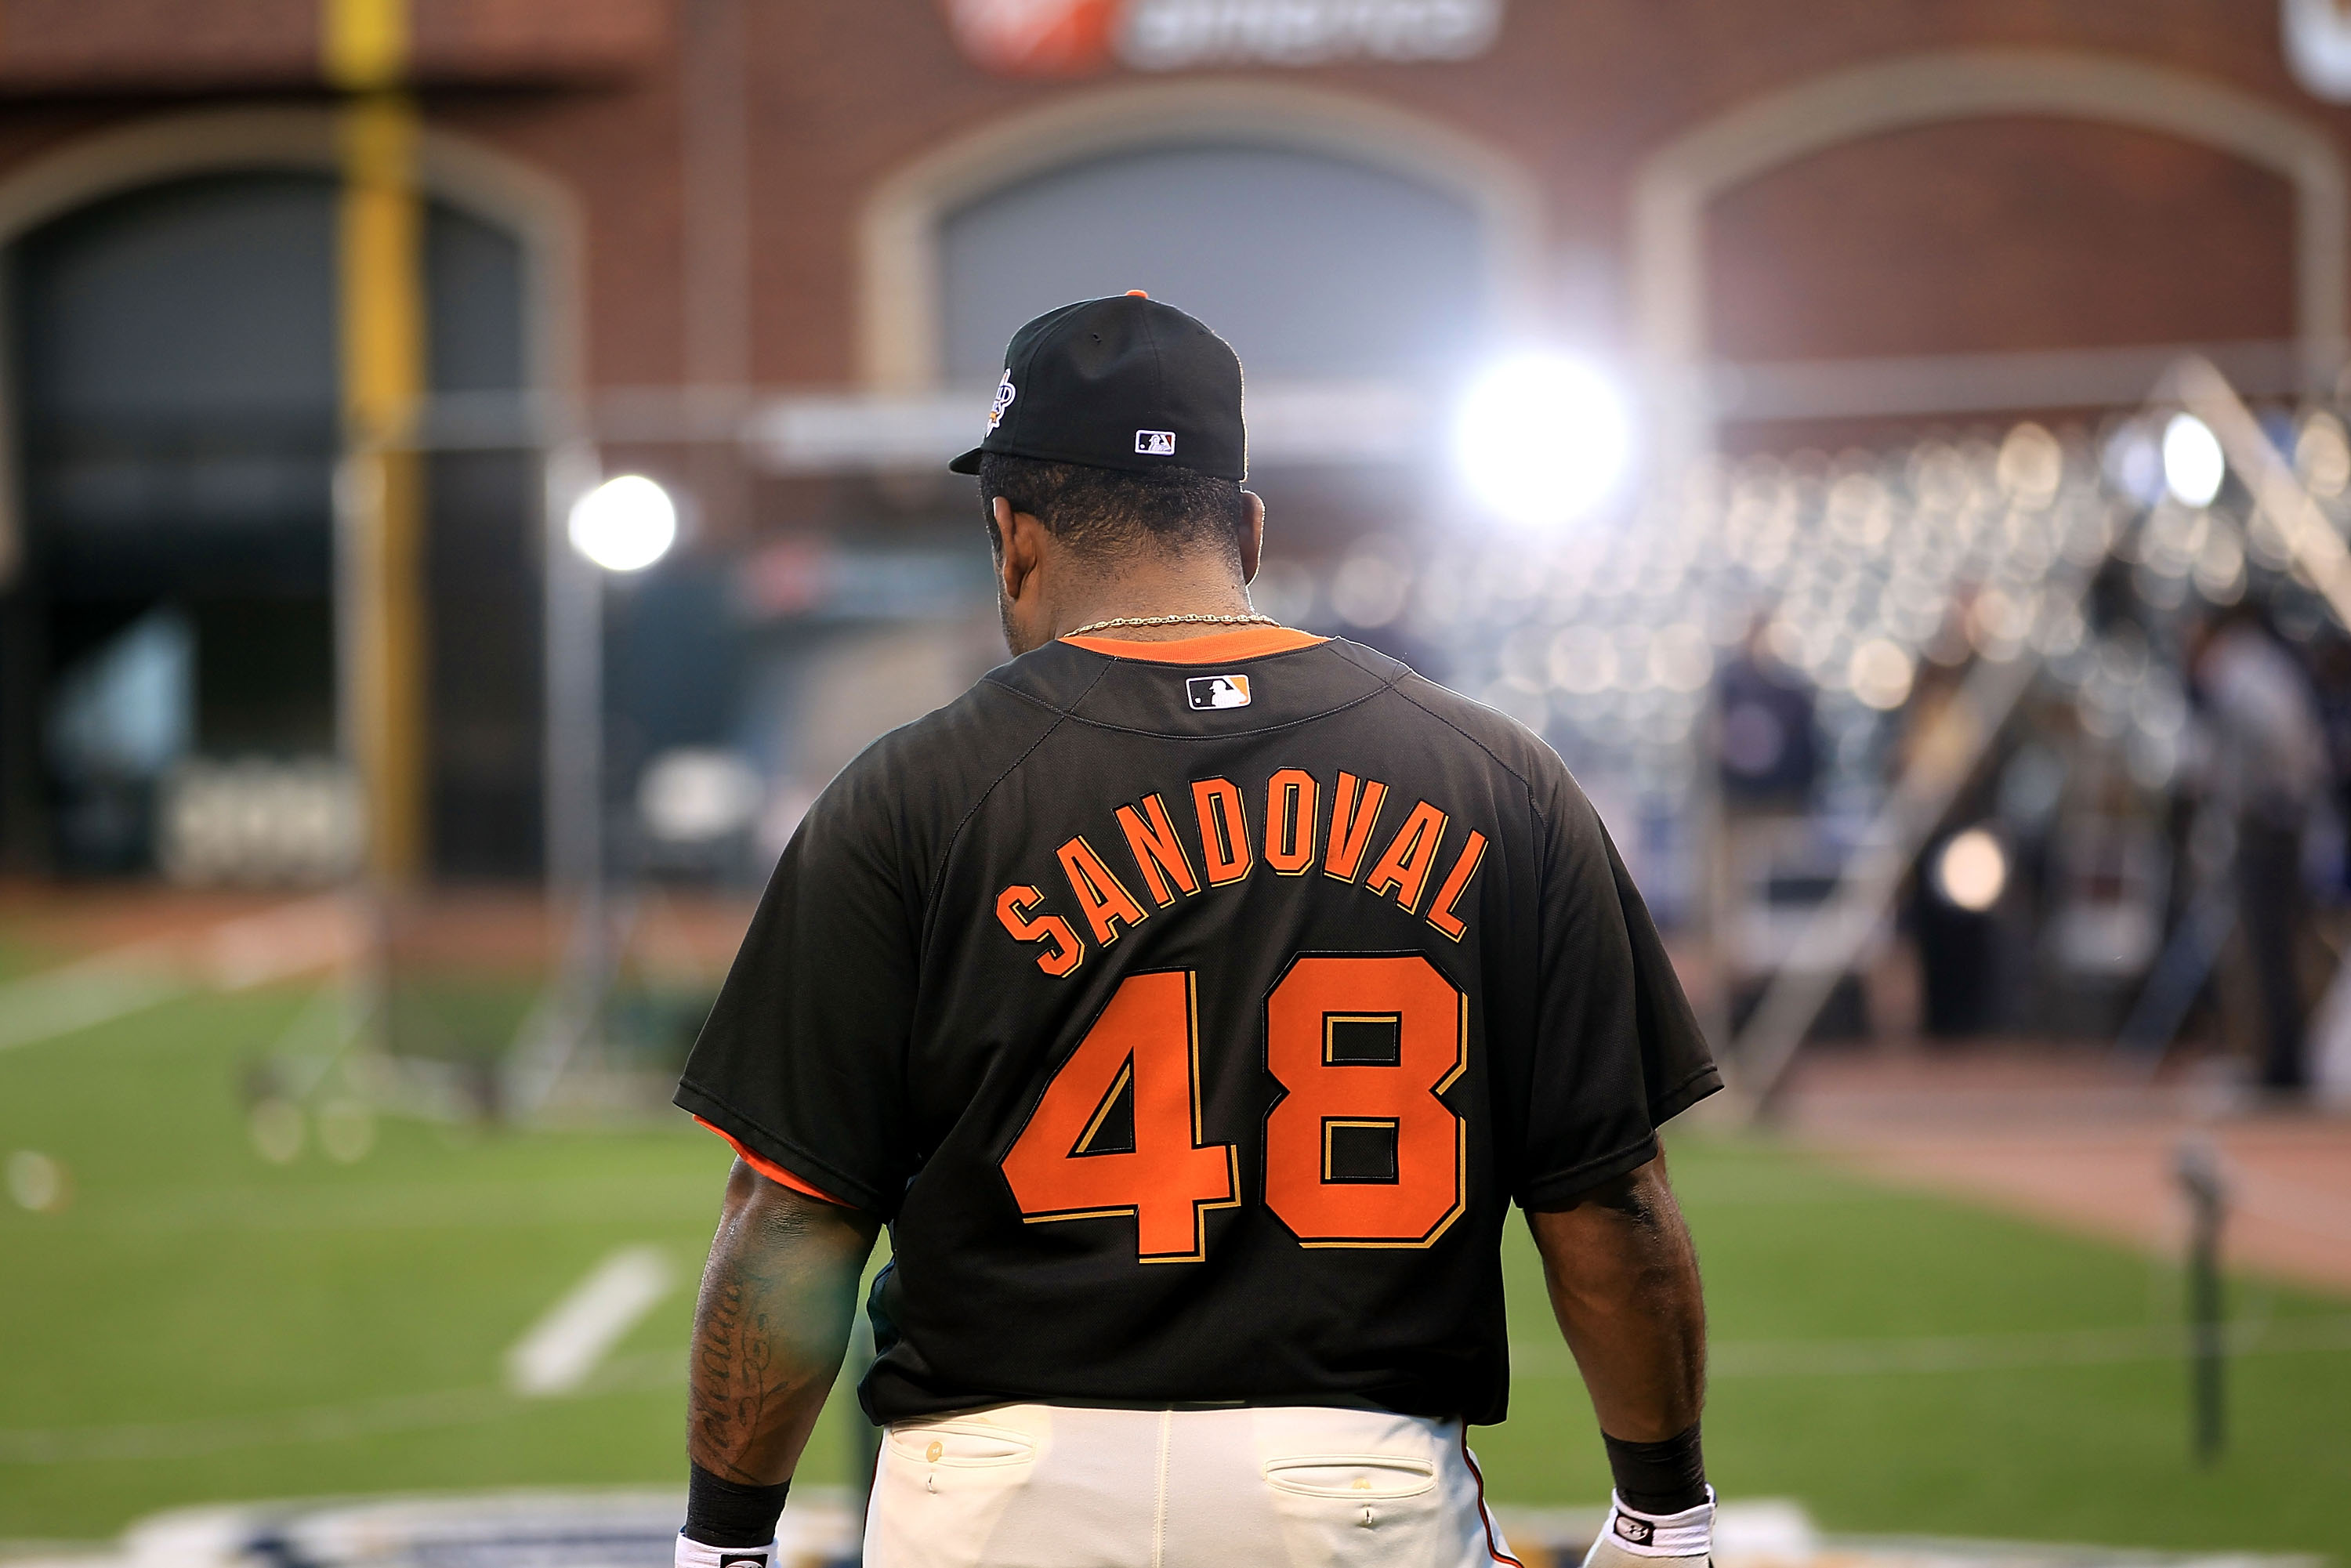 San Francisco Giants: 10 Ways Pablo Sandoval Could Get Himself Demoted, News, Scores, Highlights, Stats, and Rumors